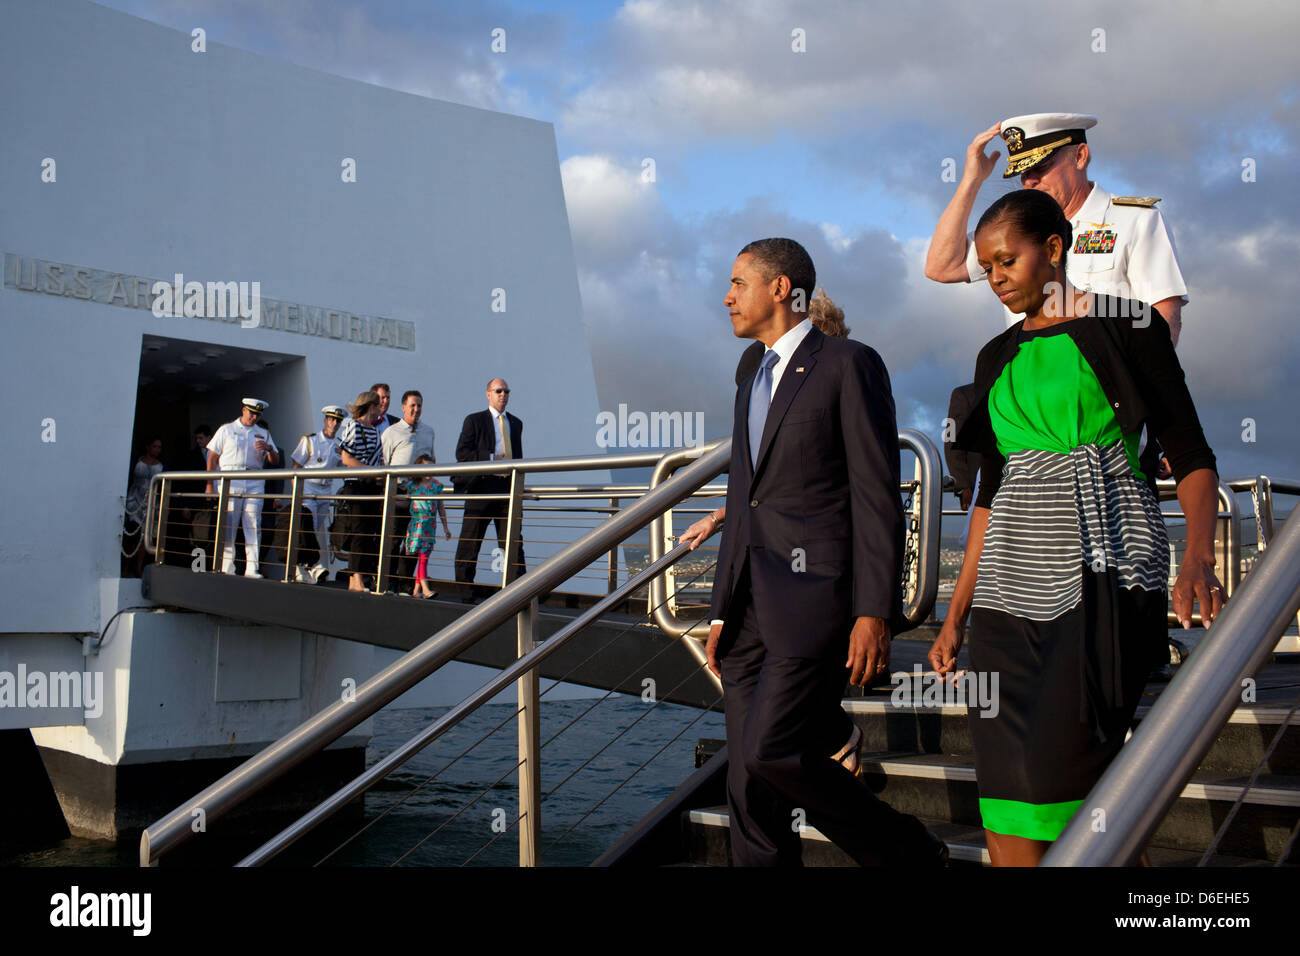 United States President Barack Obama and First Lady Michelle Obama, with Admiral Robert Willard, Commander, U.S. Pacific Command, leave the USS Arizona Memorial in Pearl Harbor, Hawaii, December 29, 2011. .Mandatory Credit: Pete Souza - White House via CNP Stock Photo